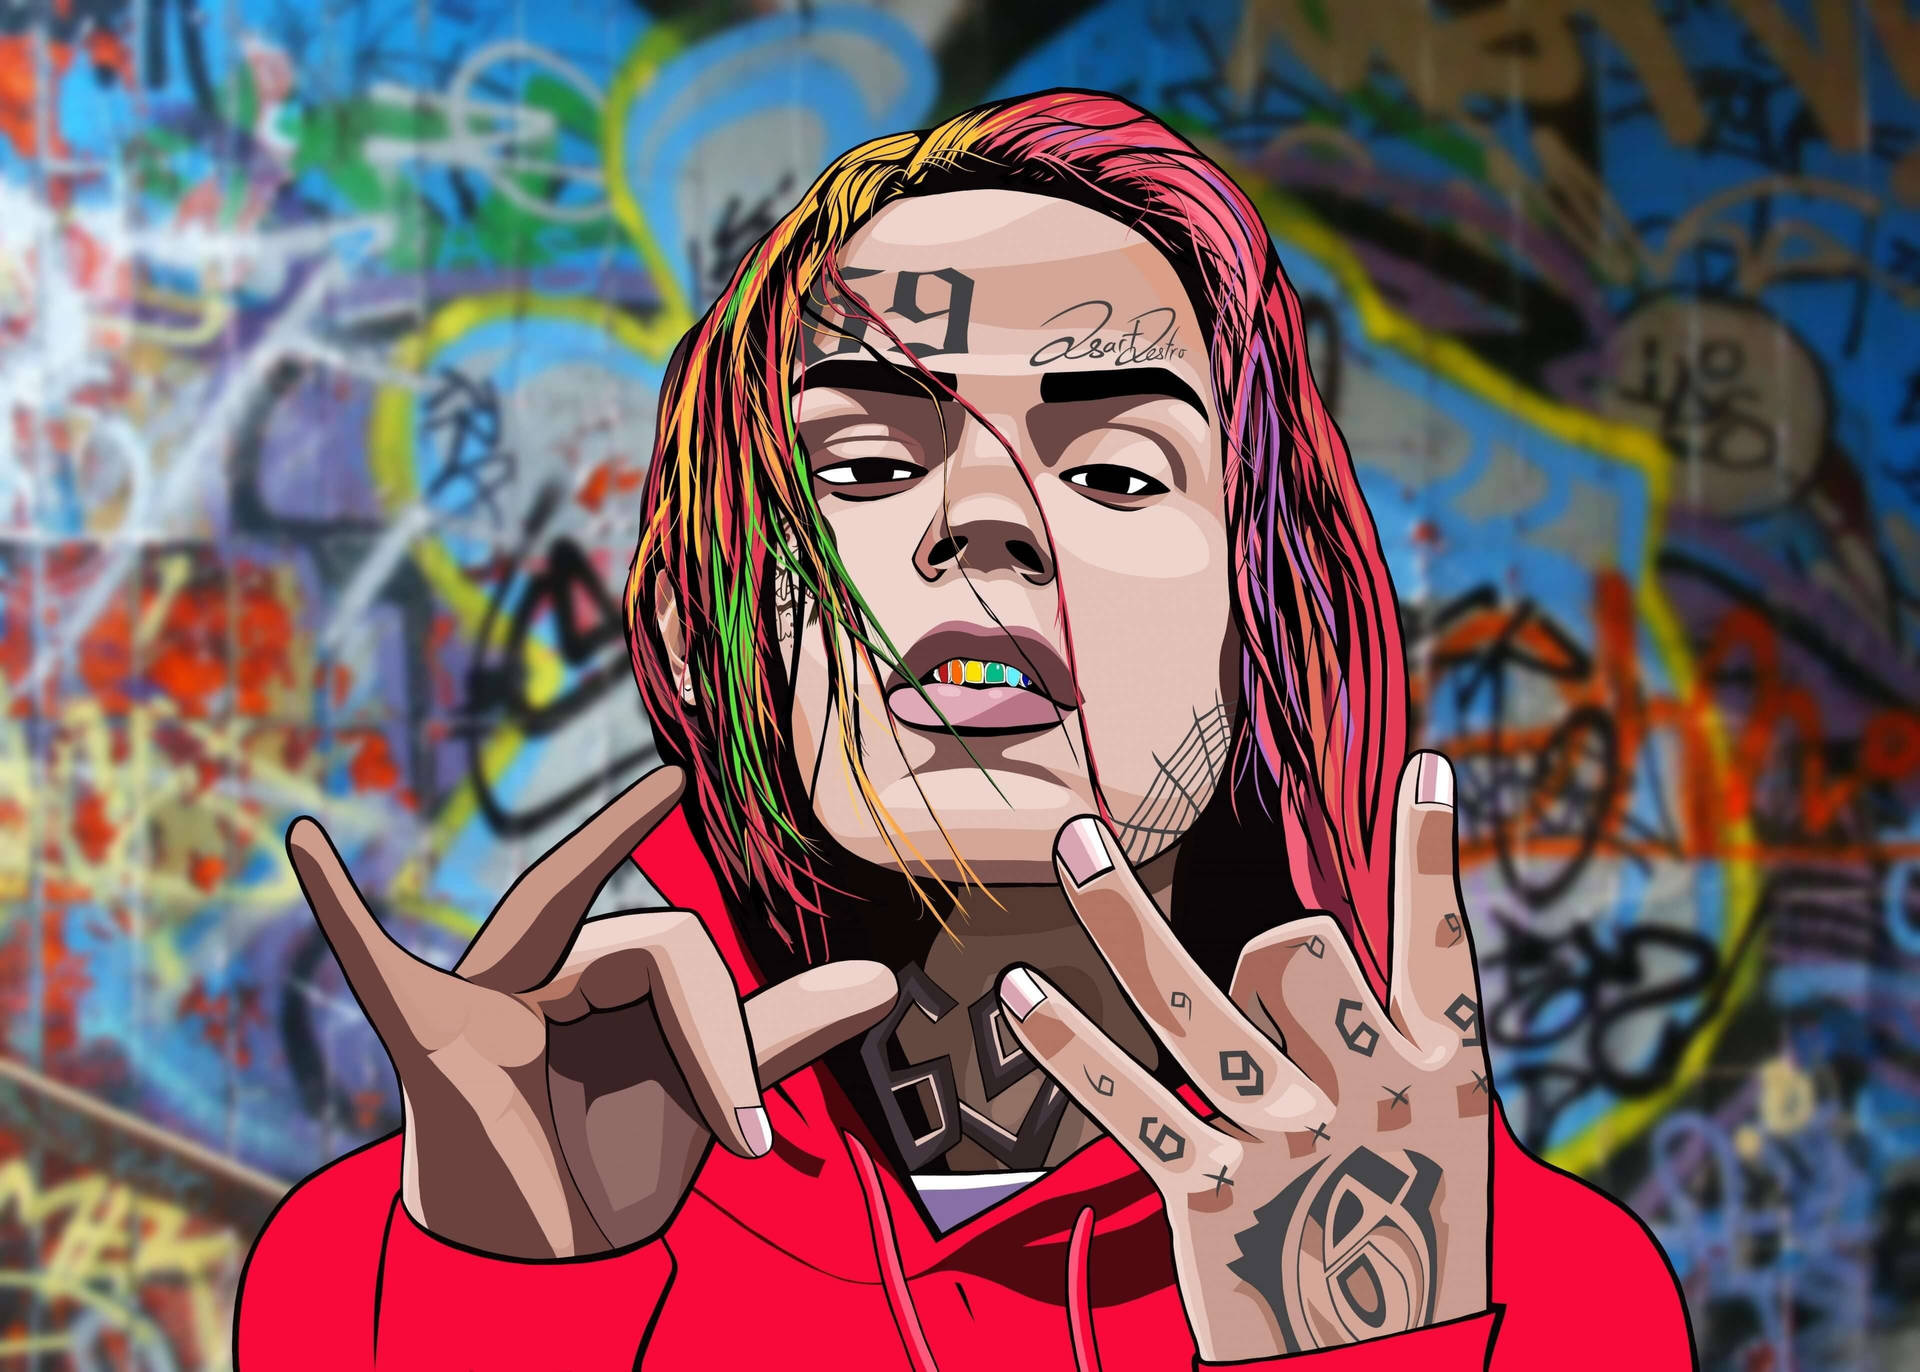 6ix9ine Tattoos And Colorful Hair Background